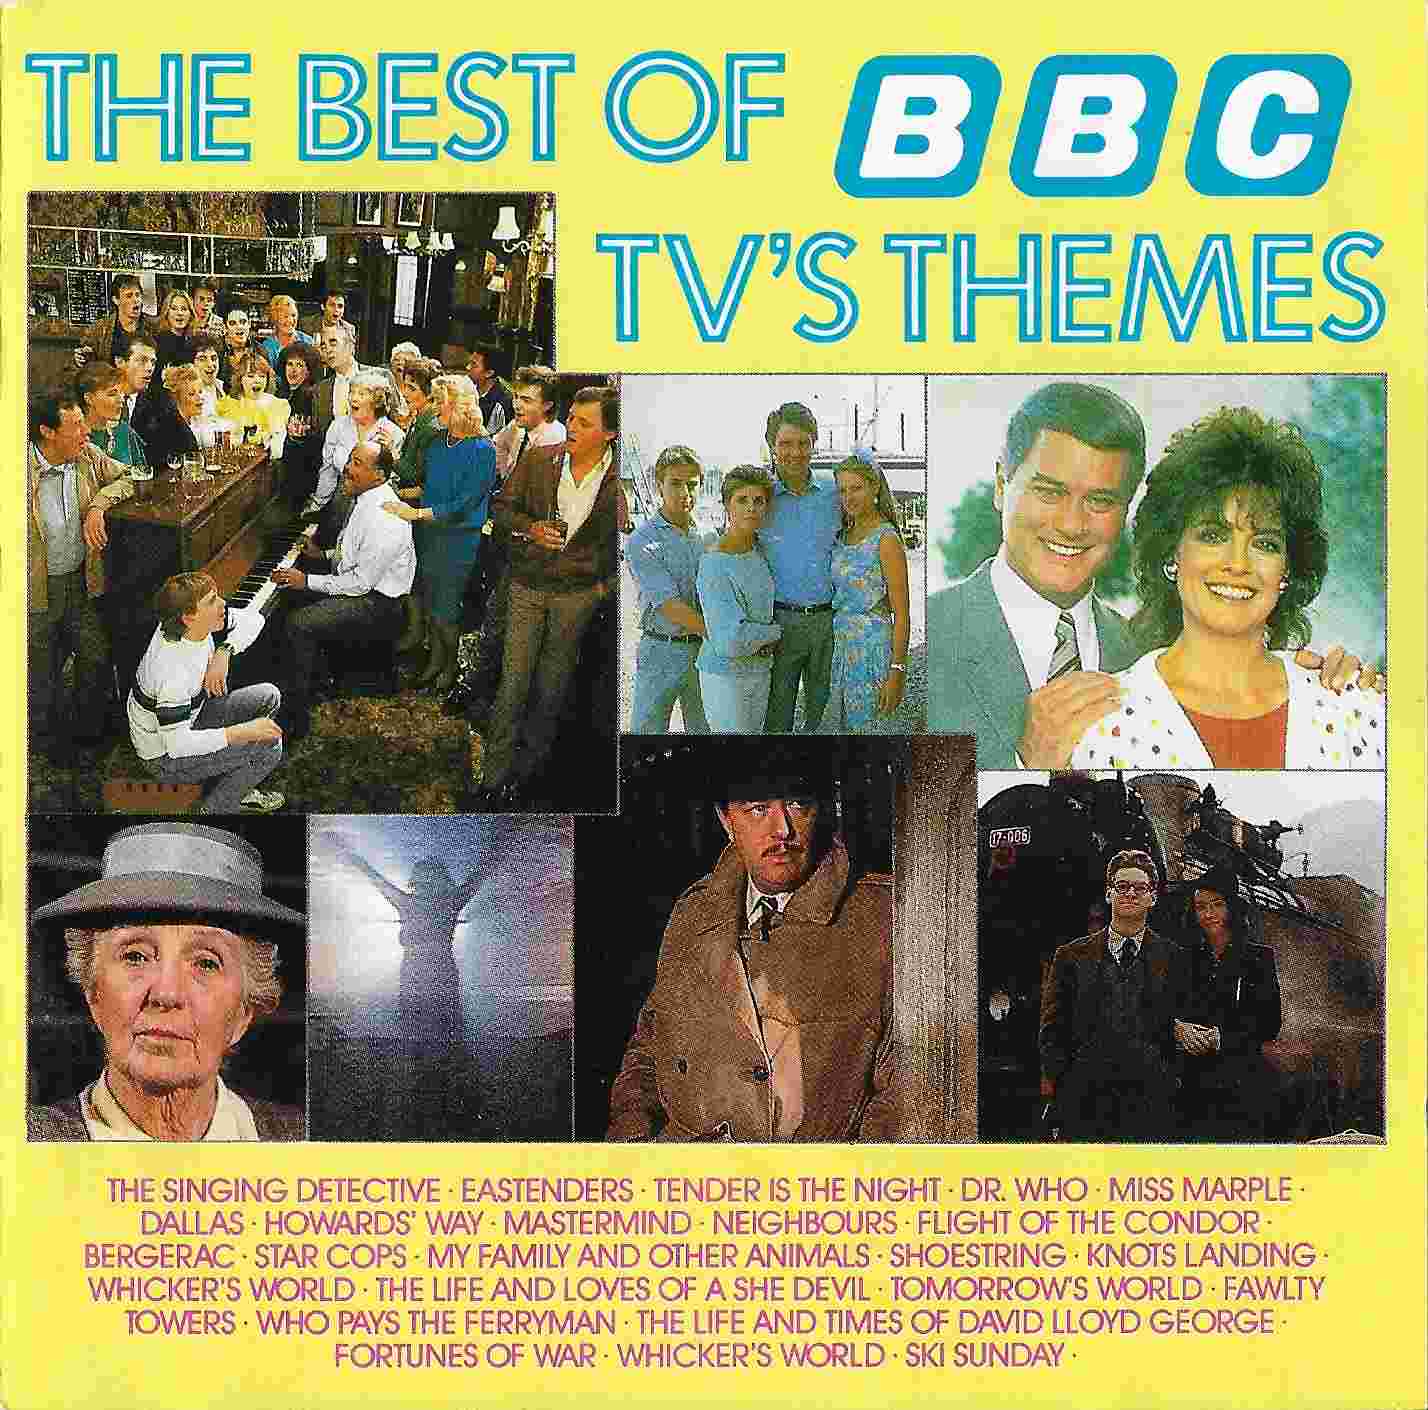 Picture of PWKS 645 The best of BBC TV's themes by artist Various from the BBC cds - Records and Tapes library